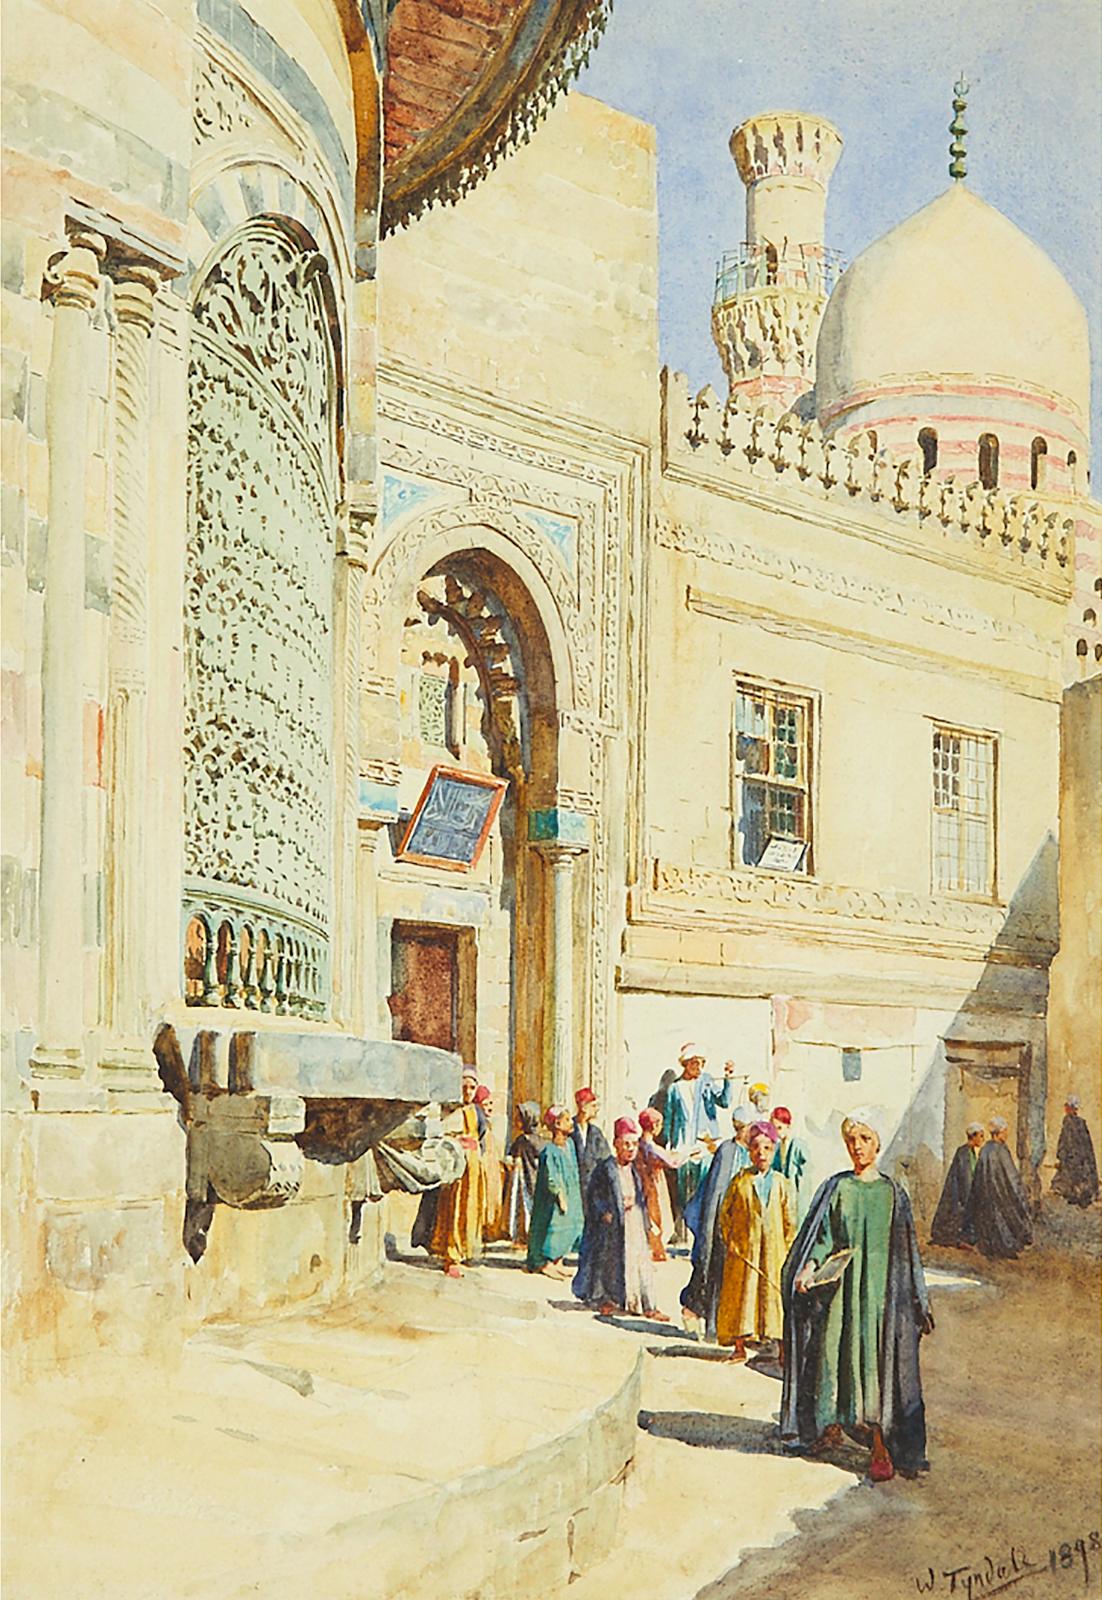 Walter Frederick Roofe Tyndale (1855-1943) - Crowd At The Mosque, 1898